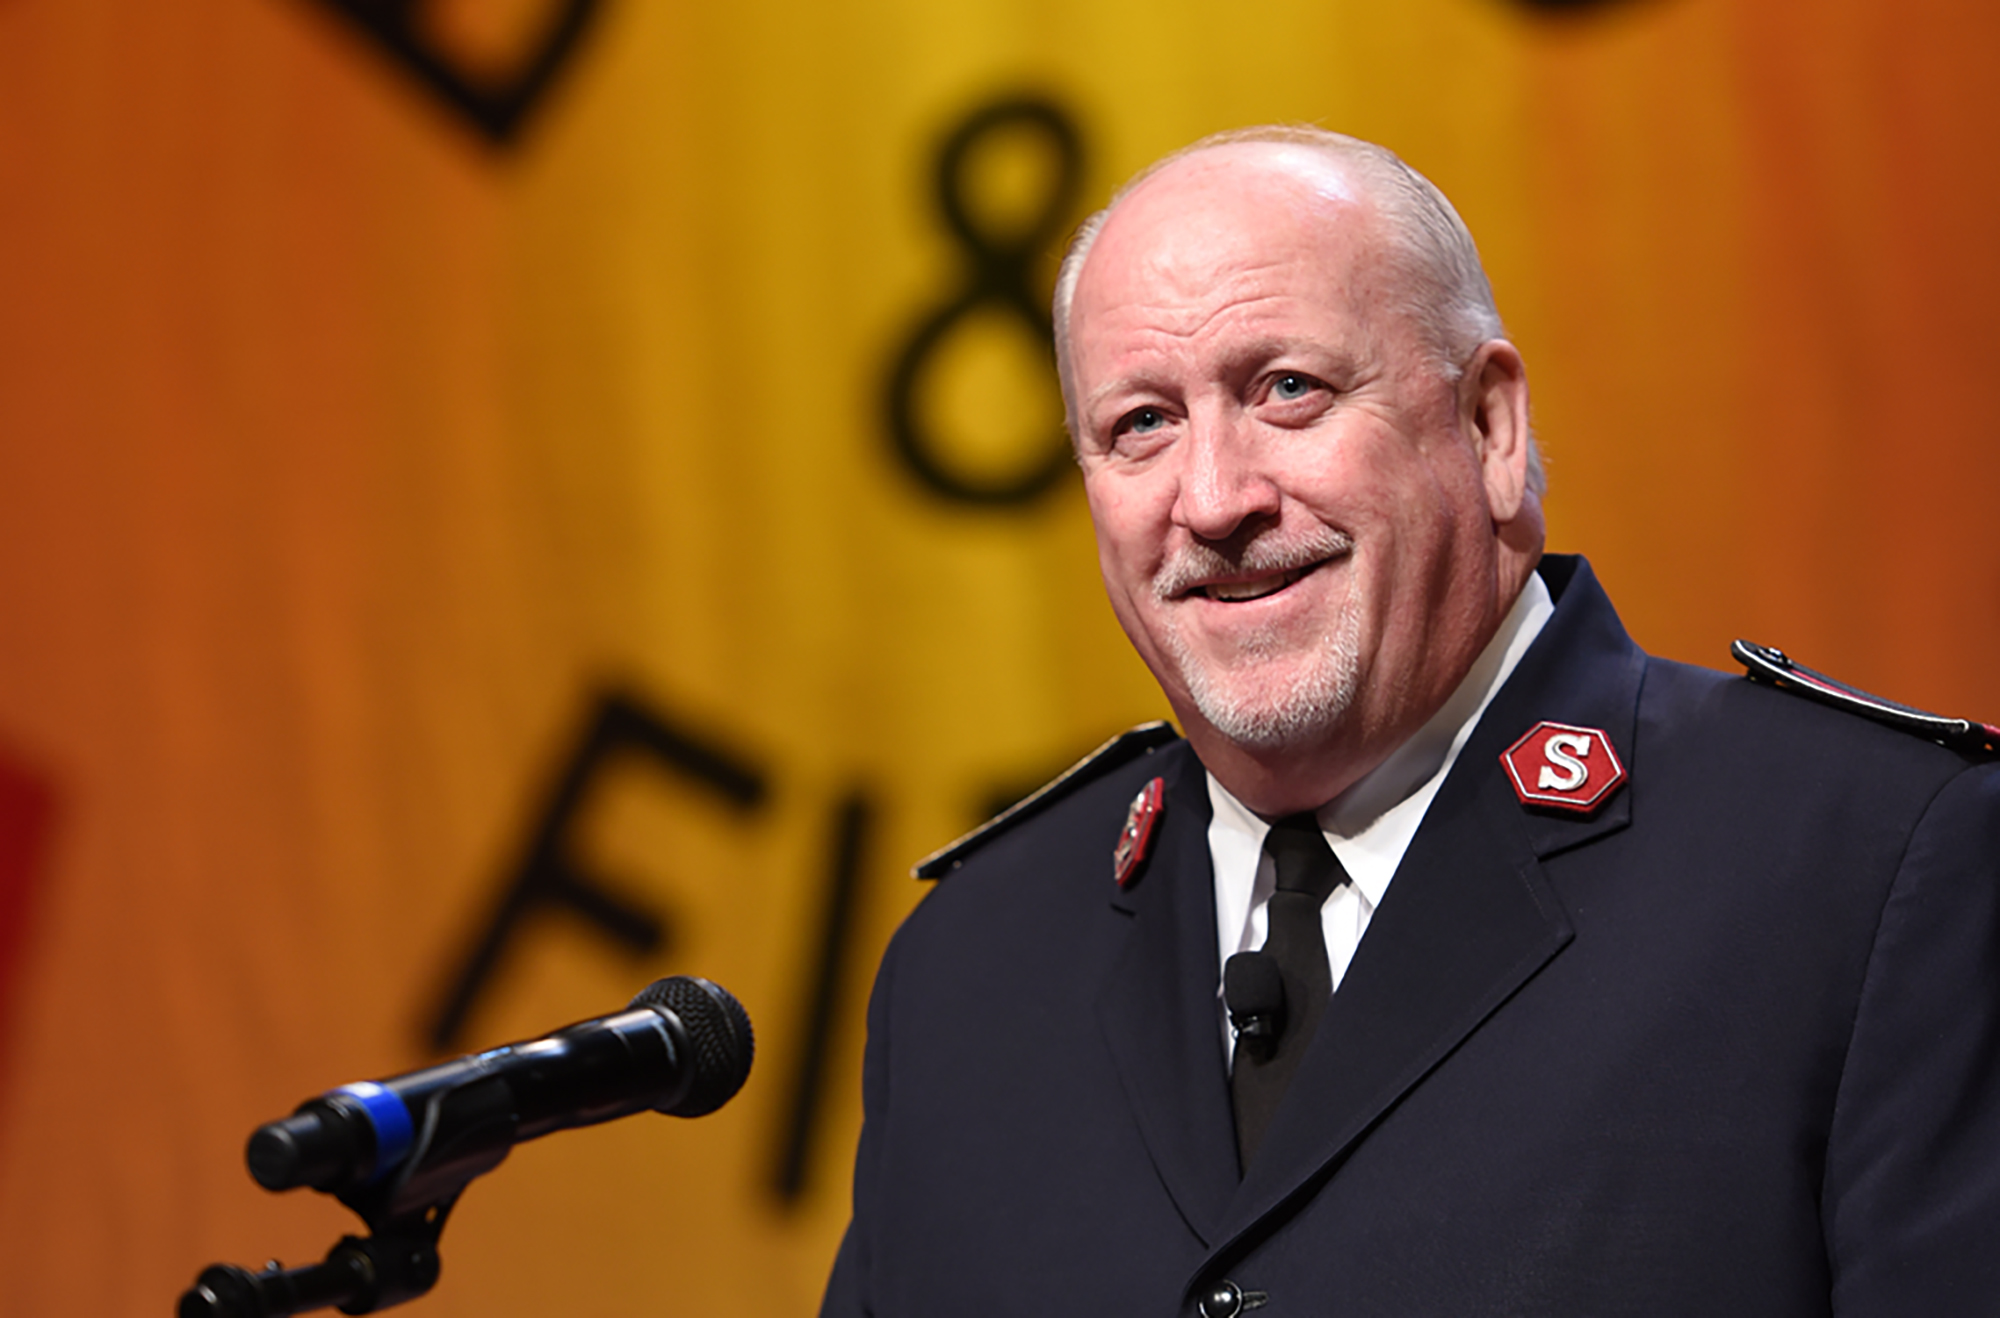 male salvation army officer speaks into a microphone on stage